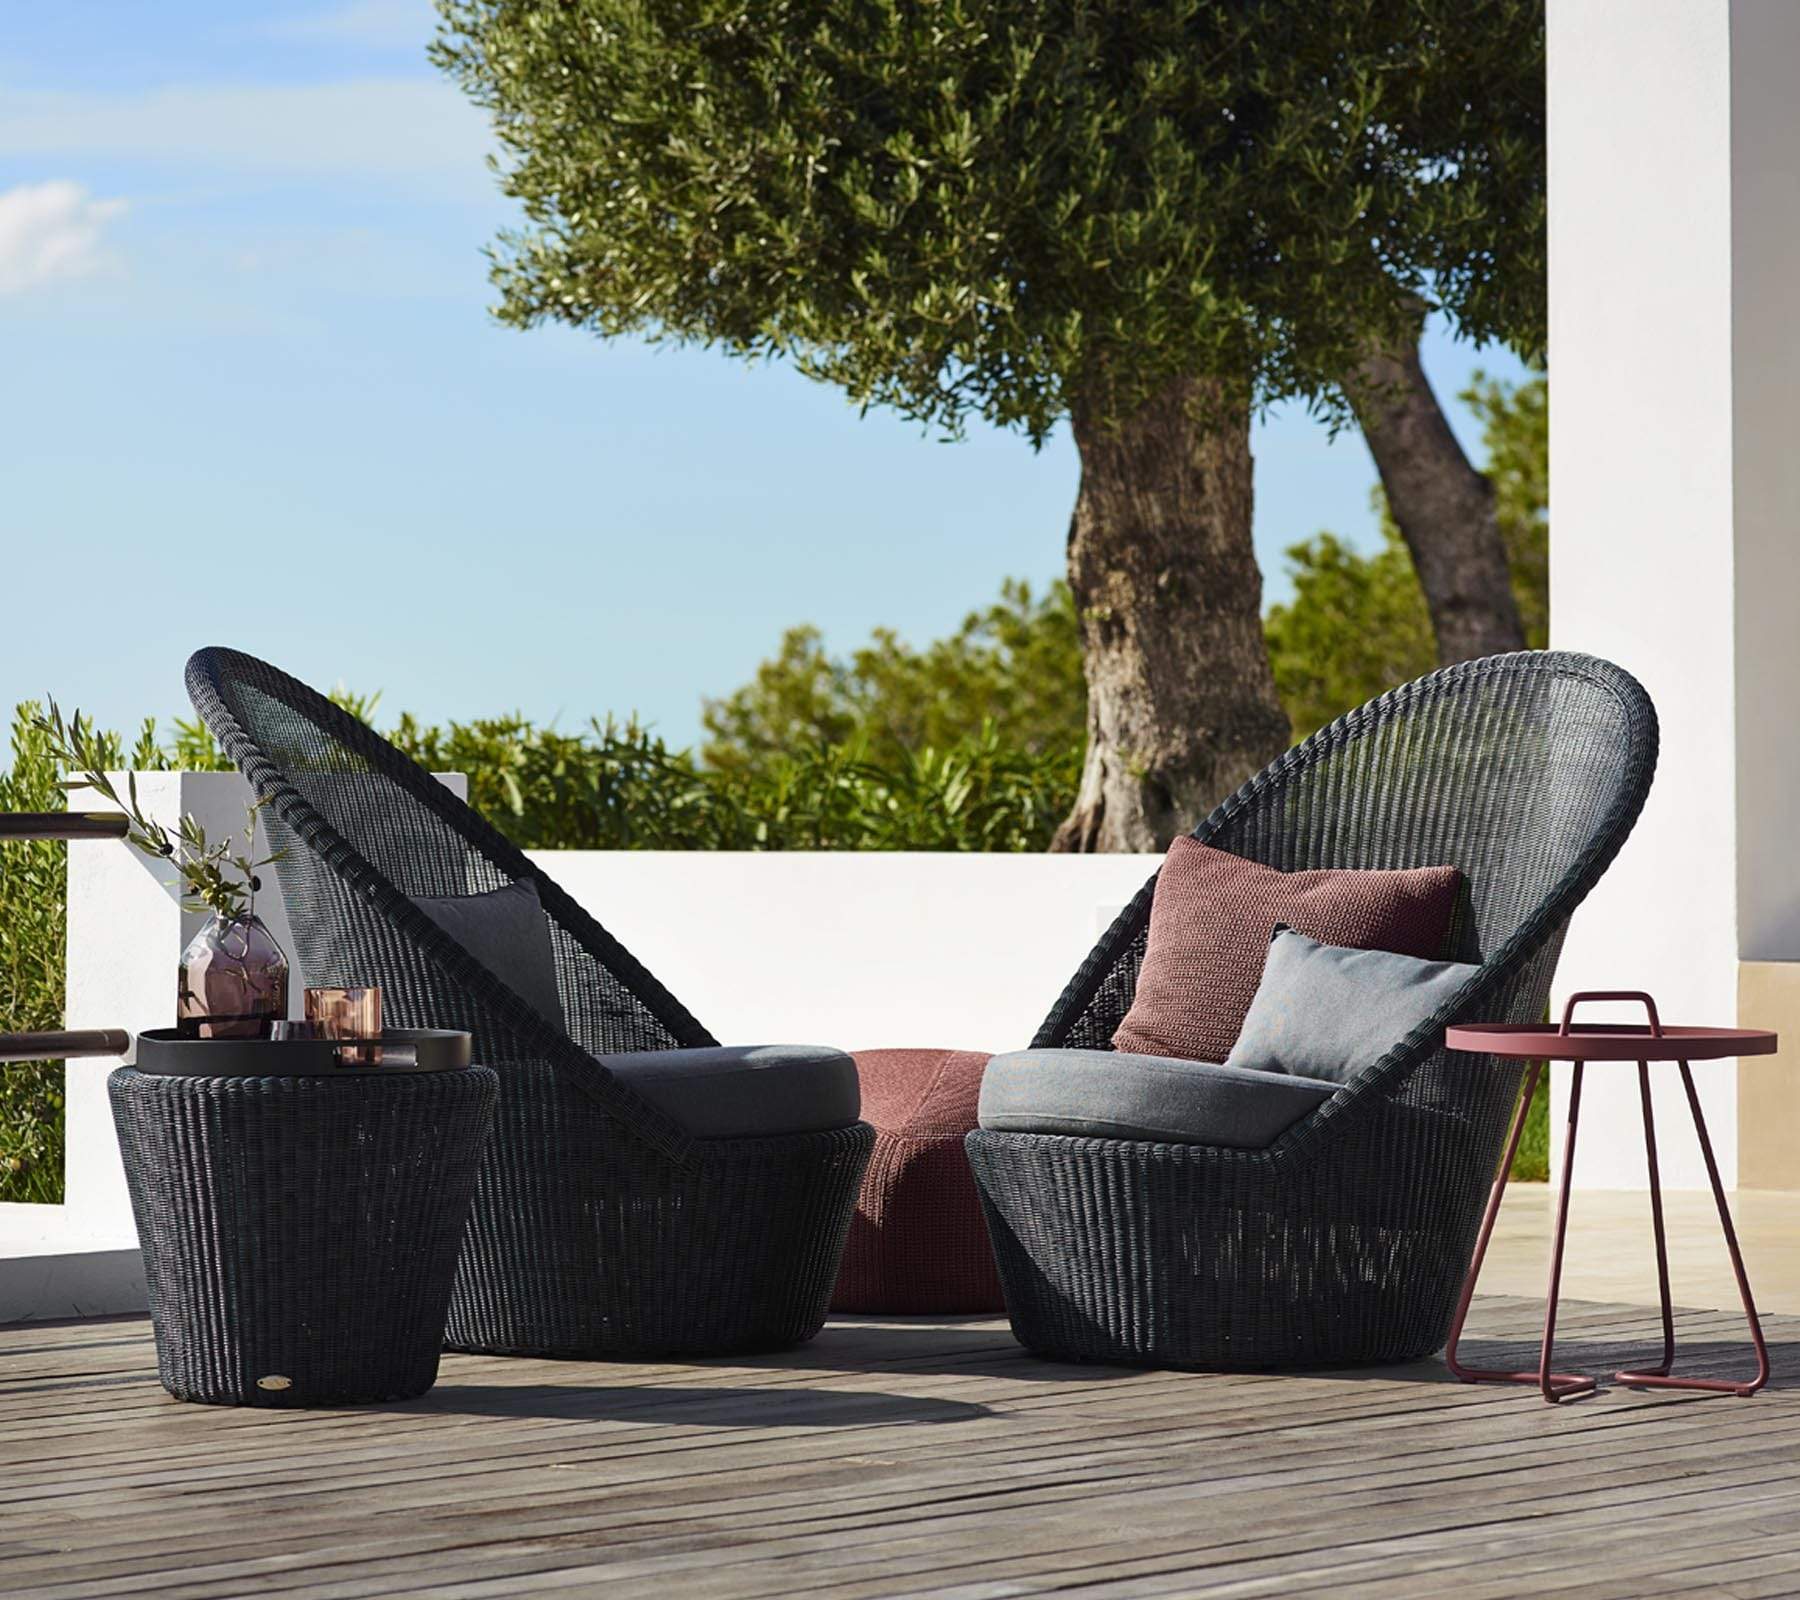 Boxhill's Kingston Outdoor Footstool | Side Table lifestyle image with Kingston Sunchair Lounge with Wheels and a small red round table at patio